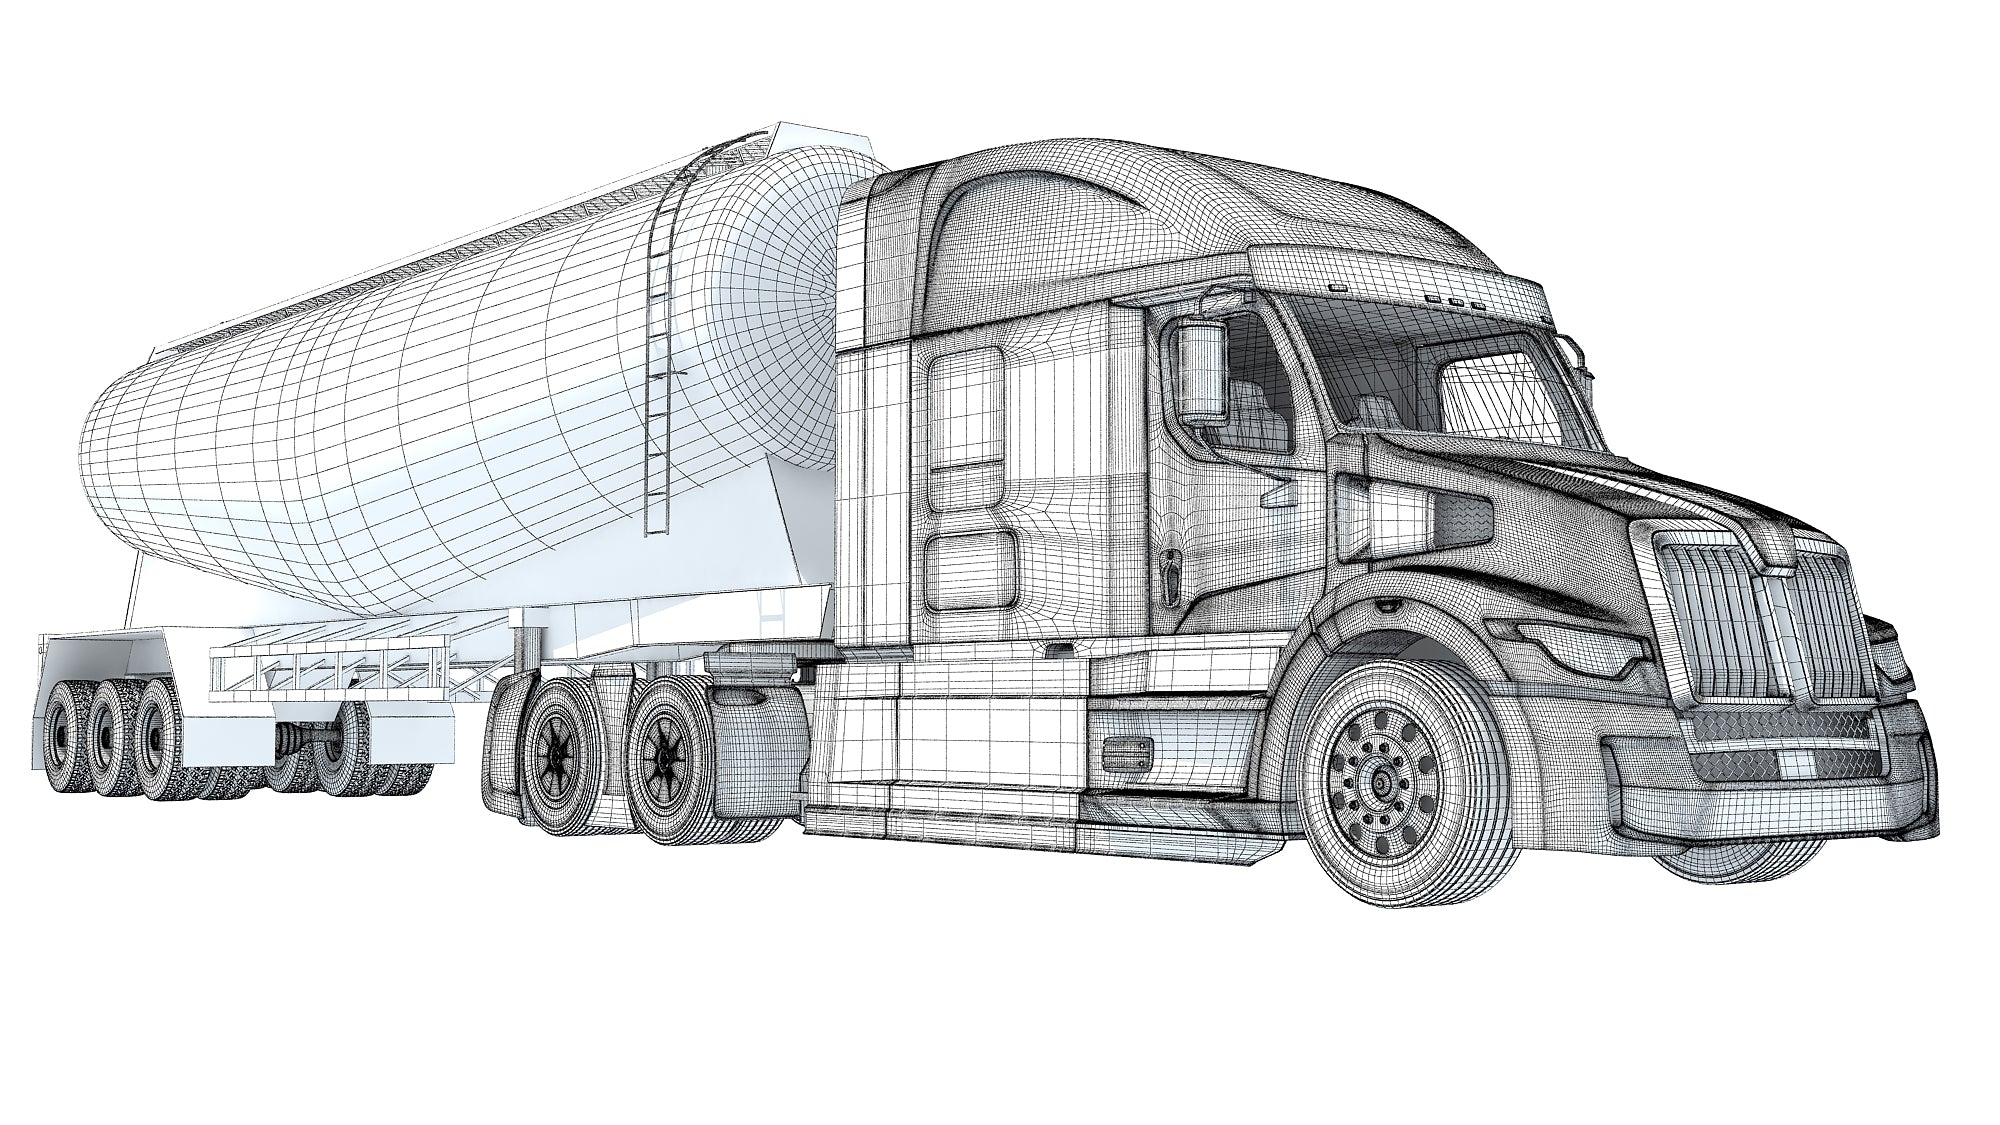 Heavy Truck with Tank Trailer